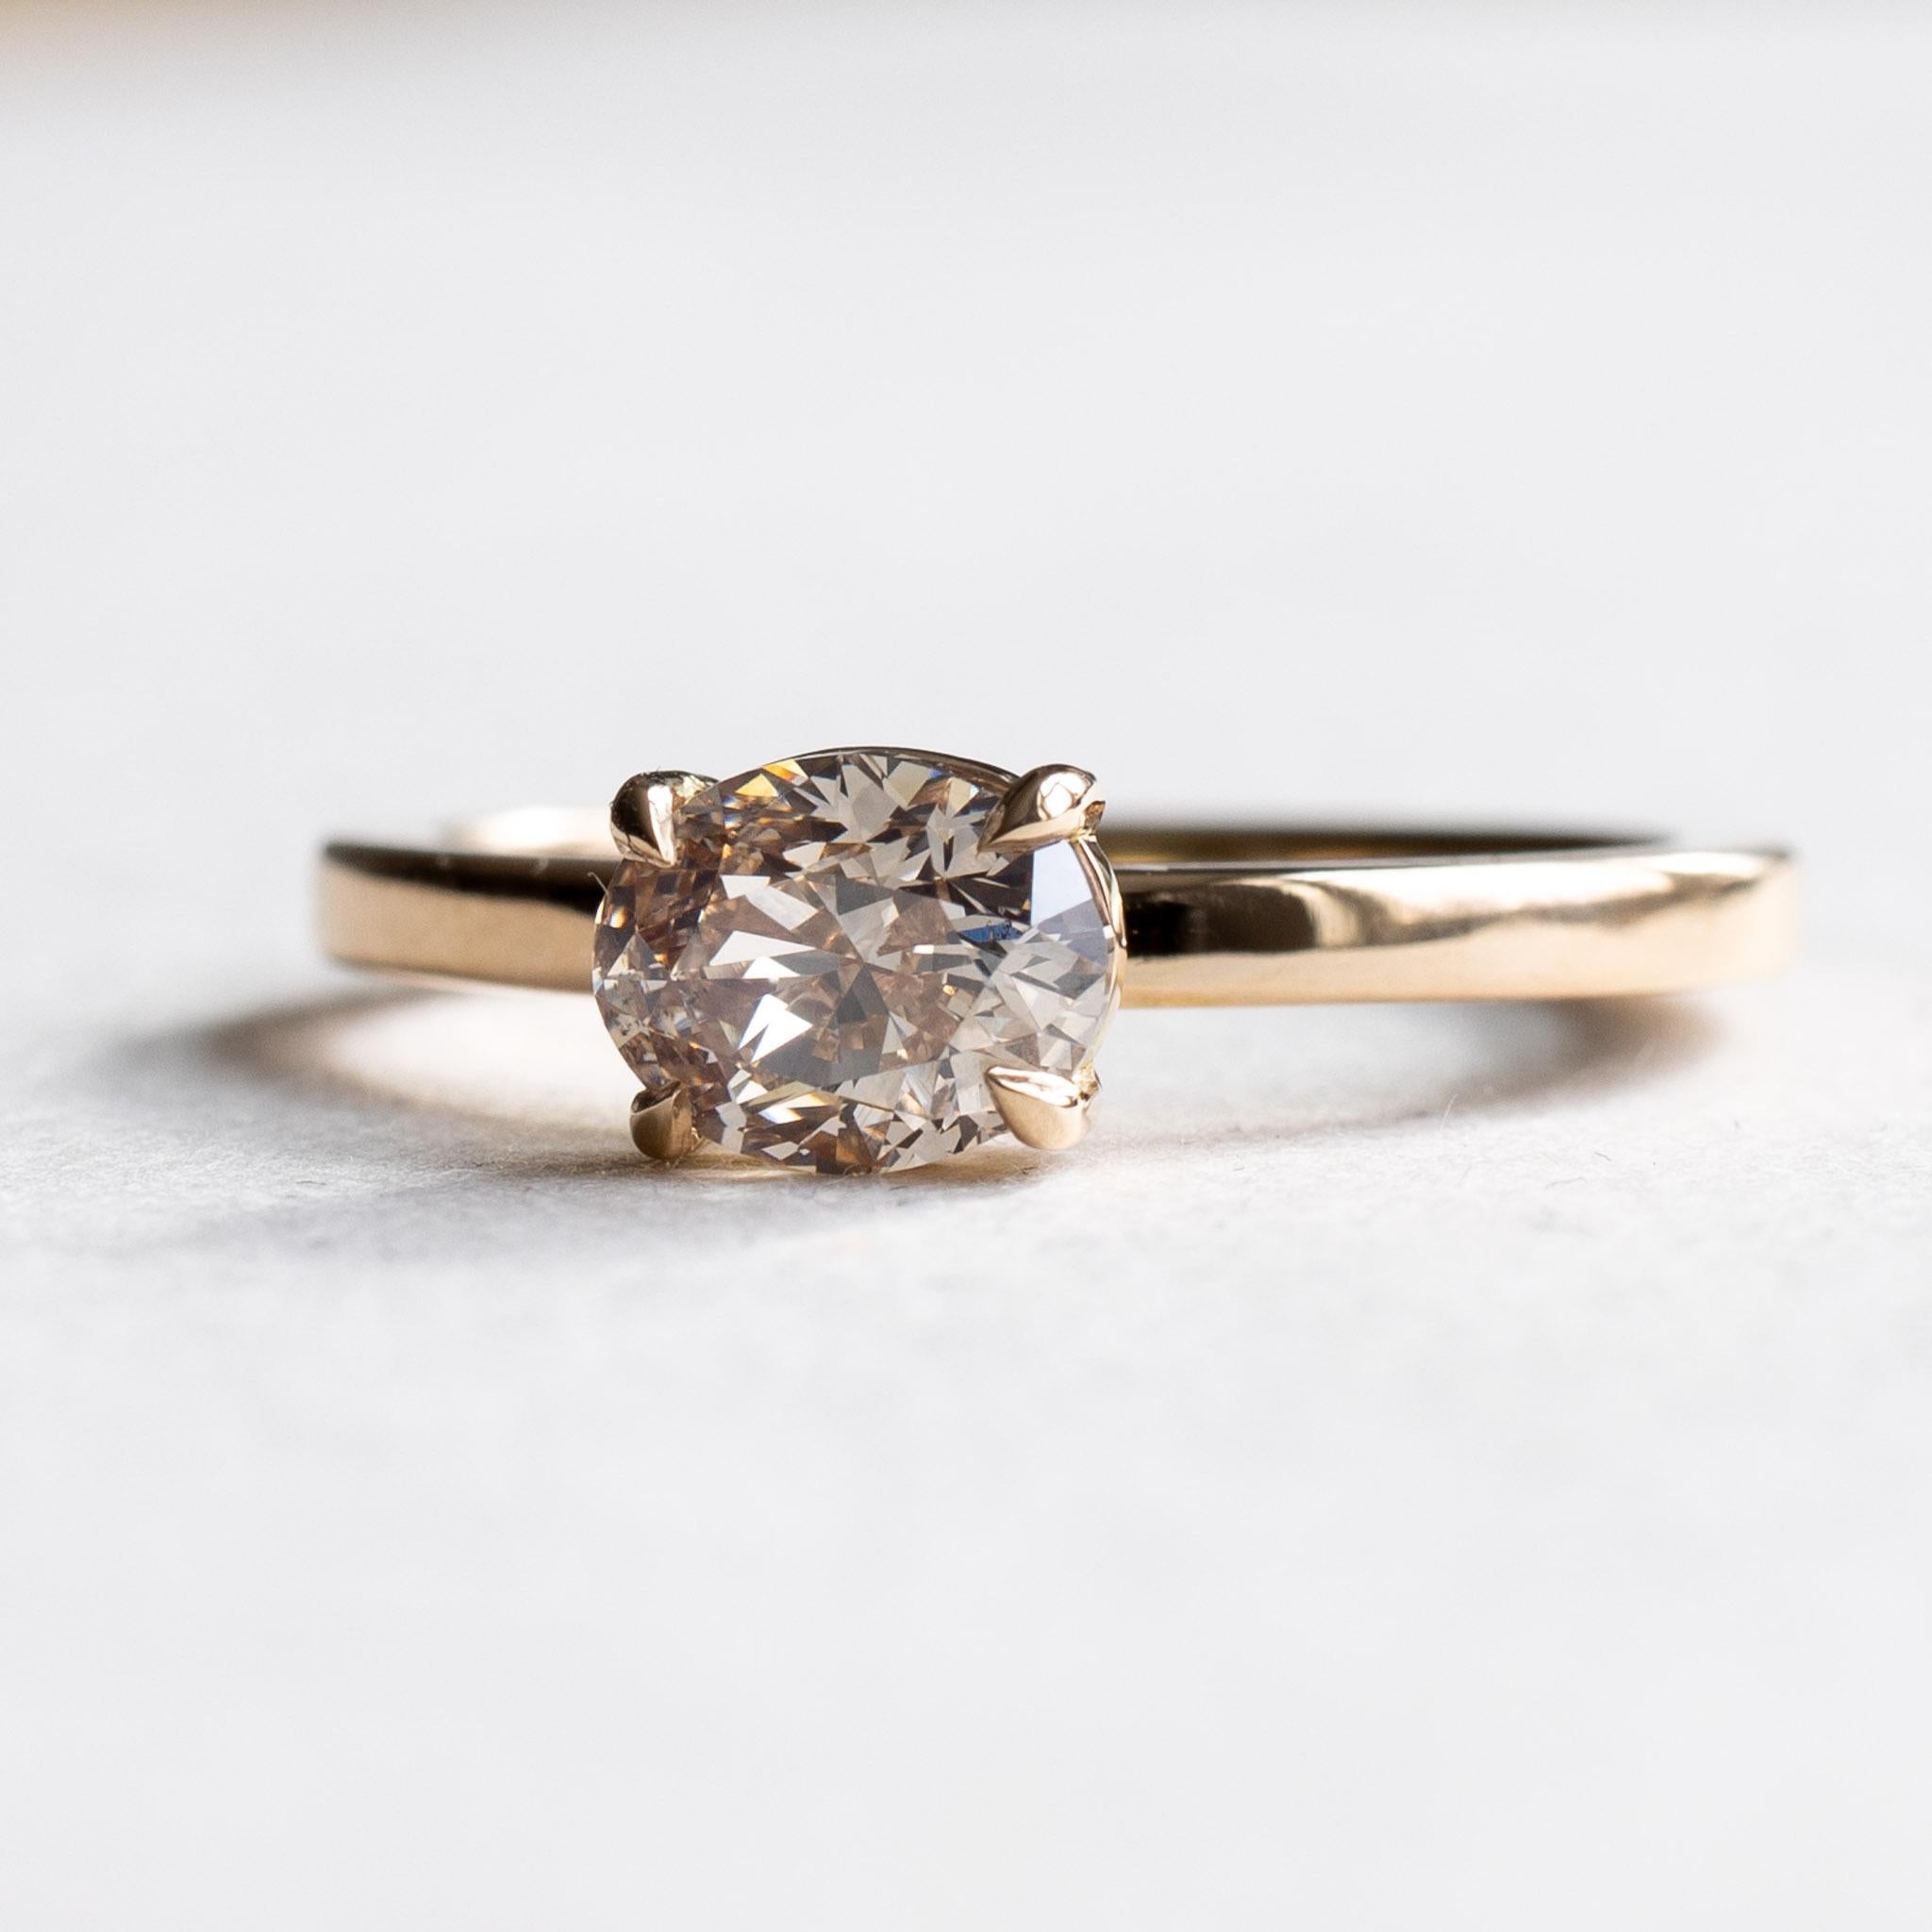 For Sale:  18K East West Diamond Ring, Oval Ring, East West Solitaire Ring, Engagement Ring 4